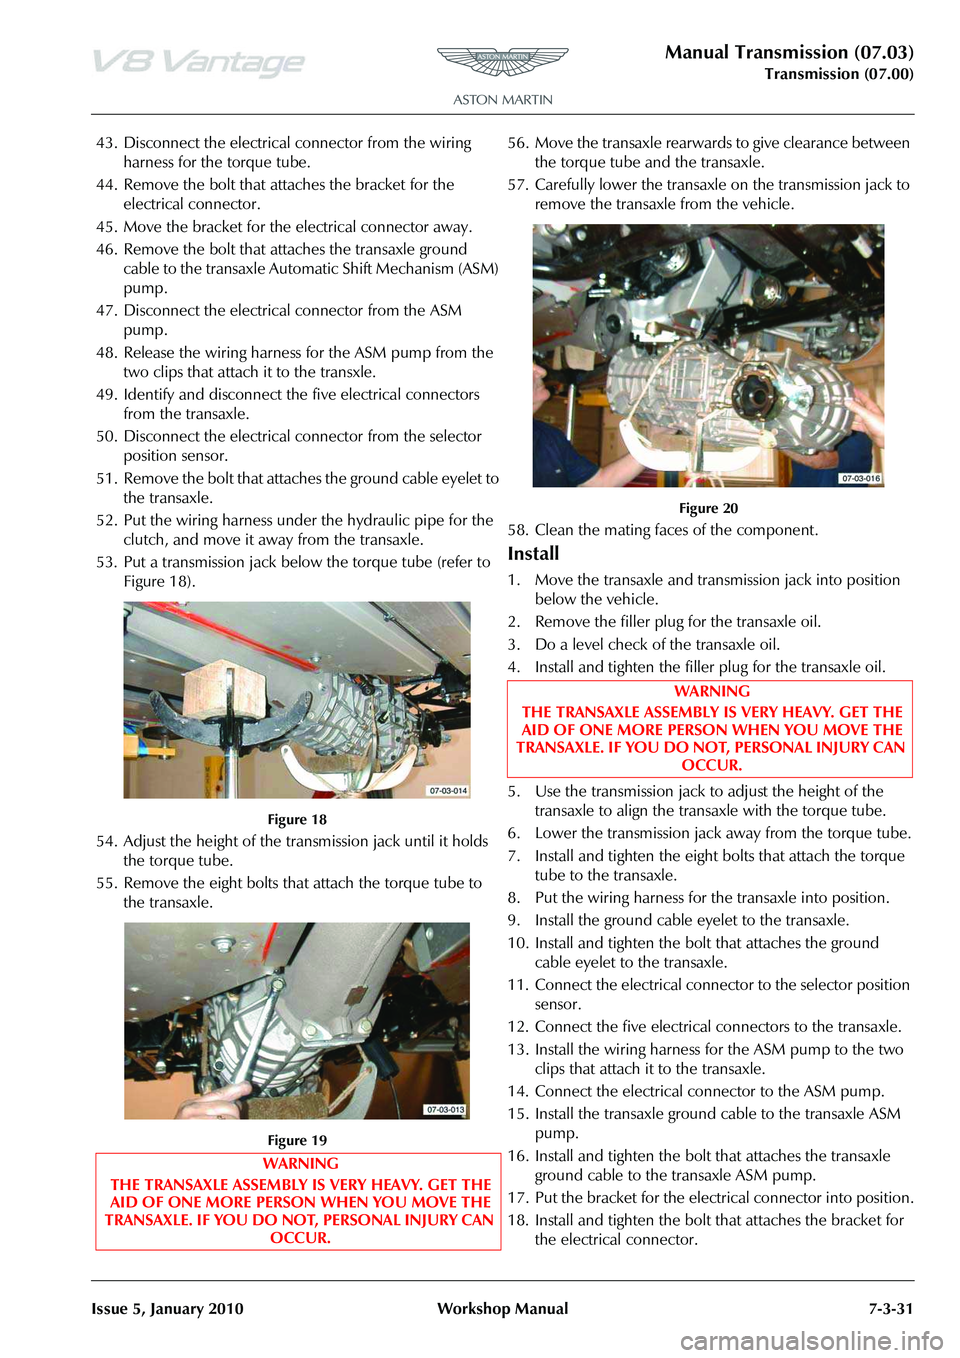 ASTON MARTIN V8 VANTAGE 2010 Owners Guide Manual Transmission (07.03)
Transmission (07.00)
Issue 5, January 2010 Workshop Manual 7-3-31
43. Disconnect the electrical  connector from the wiring 
harness for the torque tube.
44. Remove the bolt